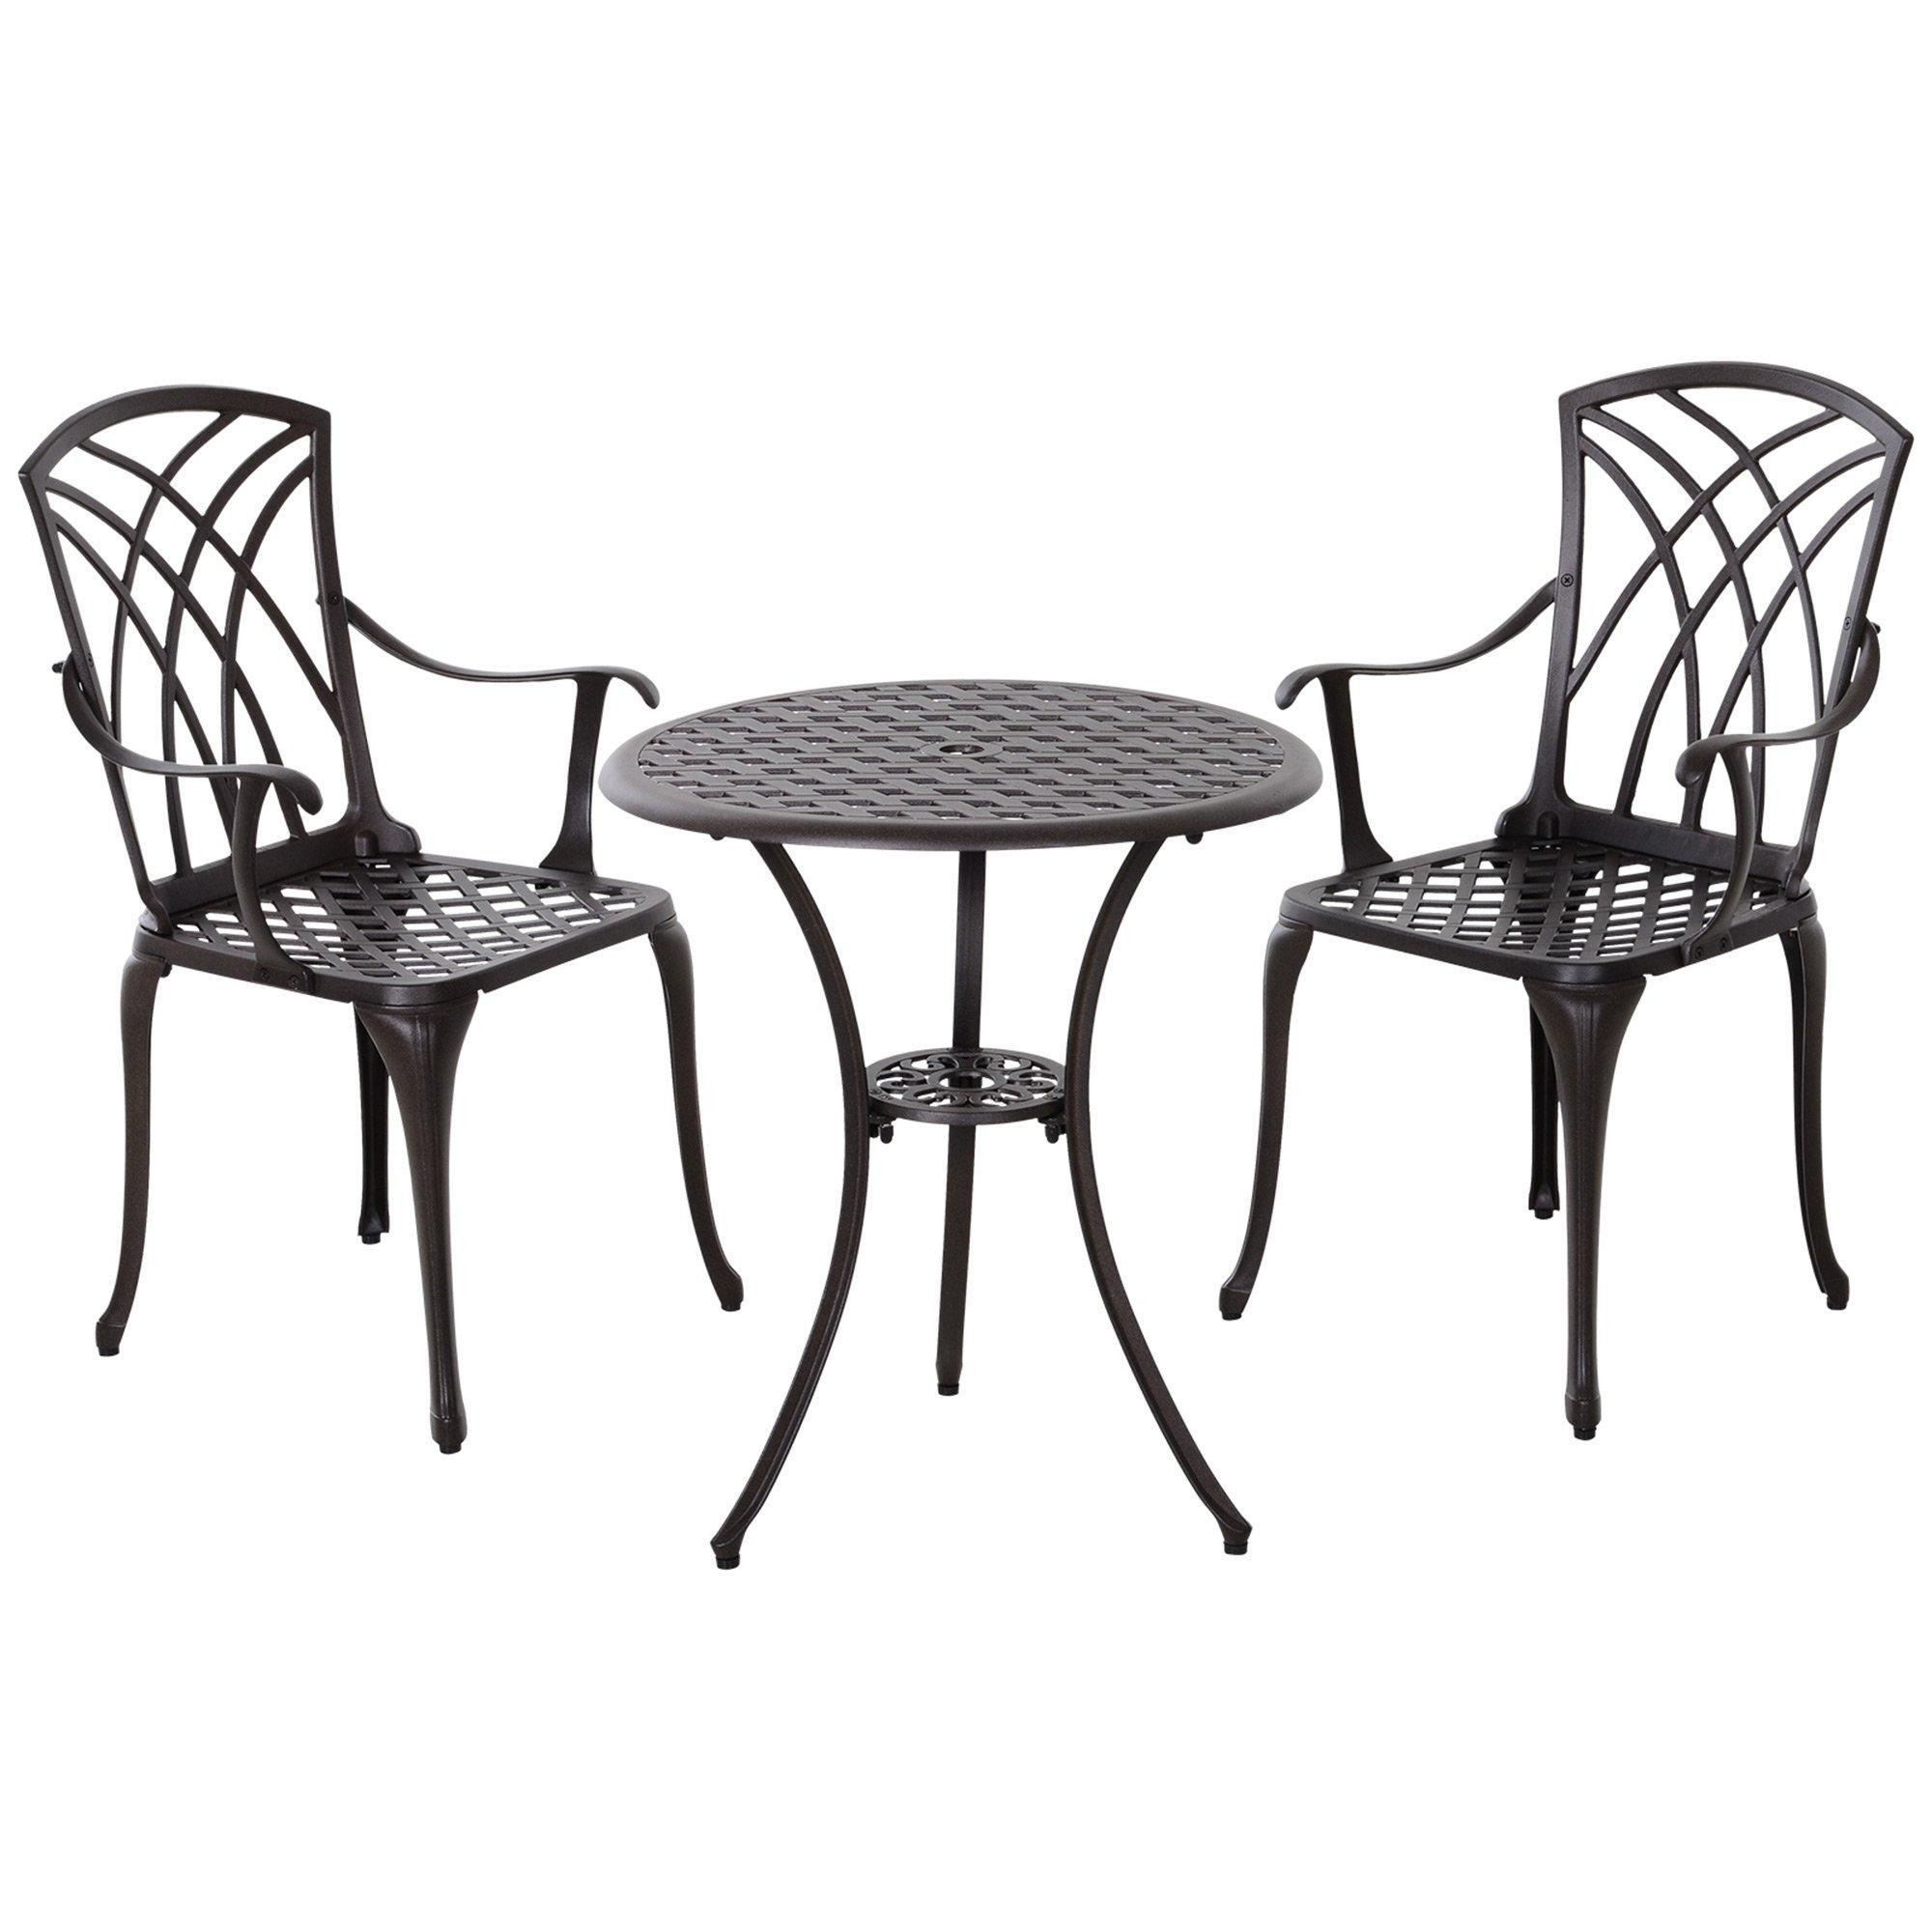 3 PCs Coffee Table Chairs Outdoor Garden Furniture Set w/Umbrella Hole - image 1